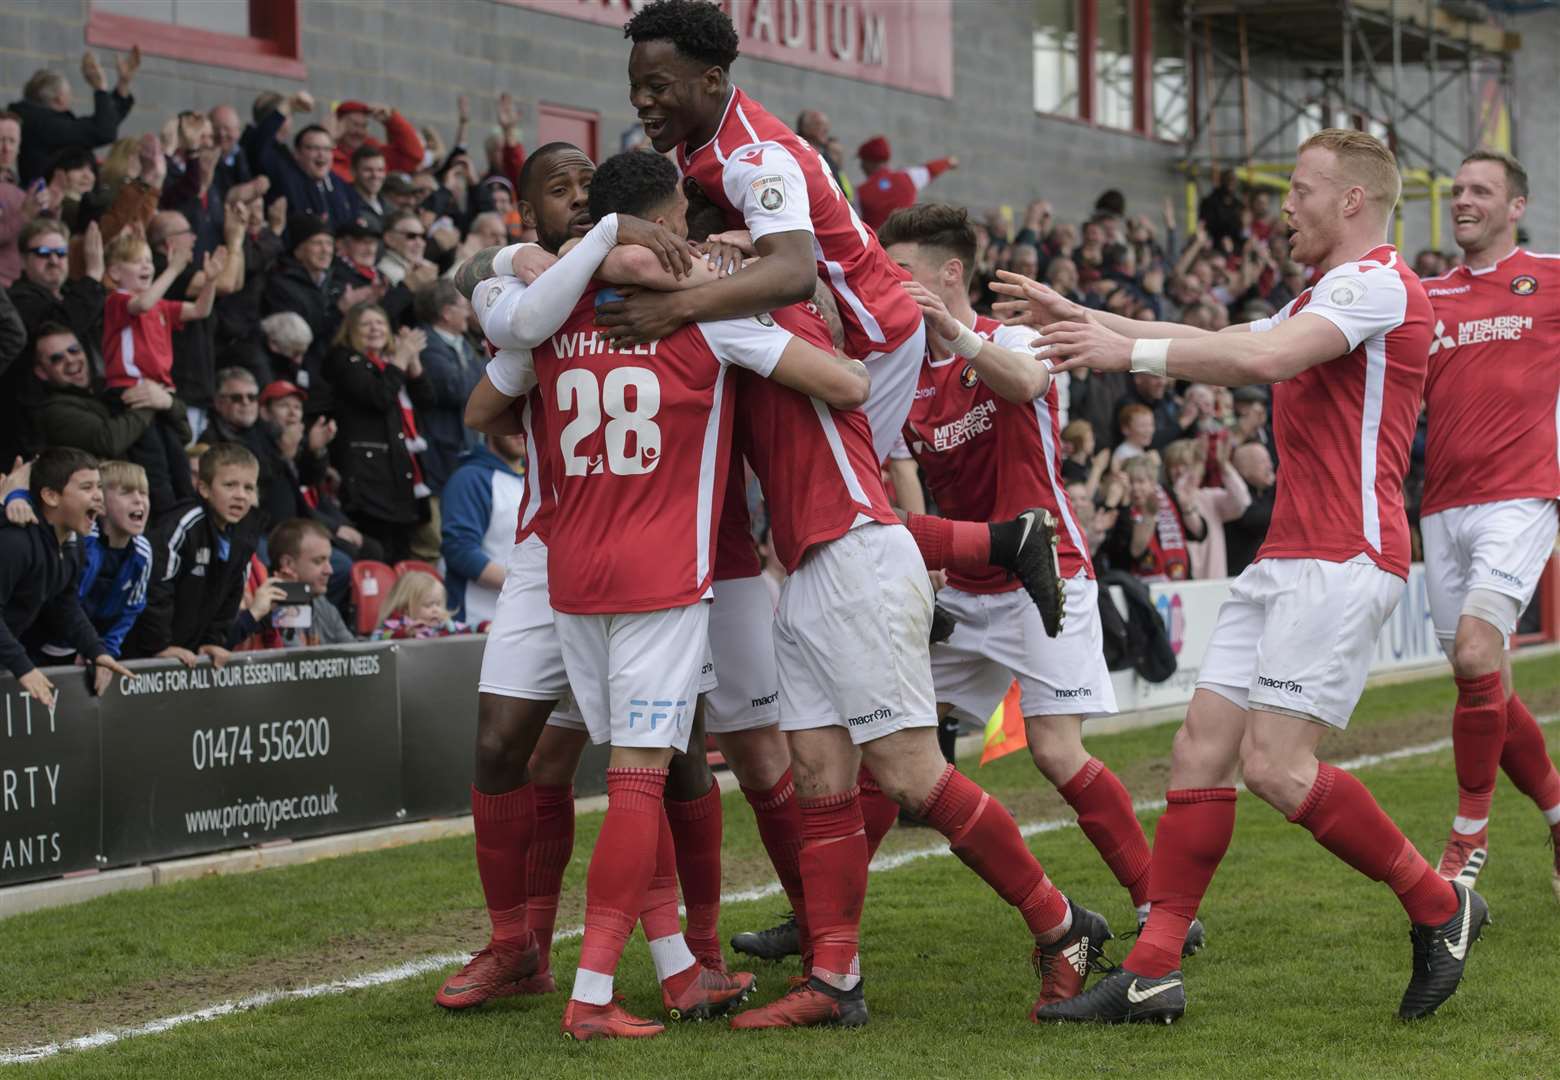 It's already been a memorable first season back in the National League for Ebbsfleet Picture: Andy Payton